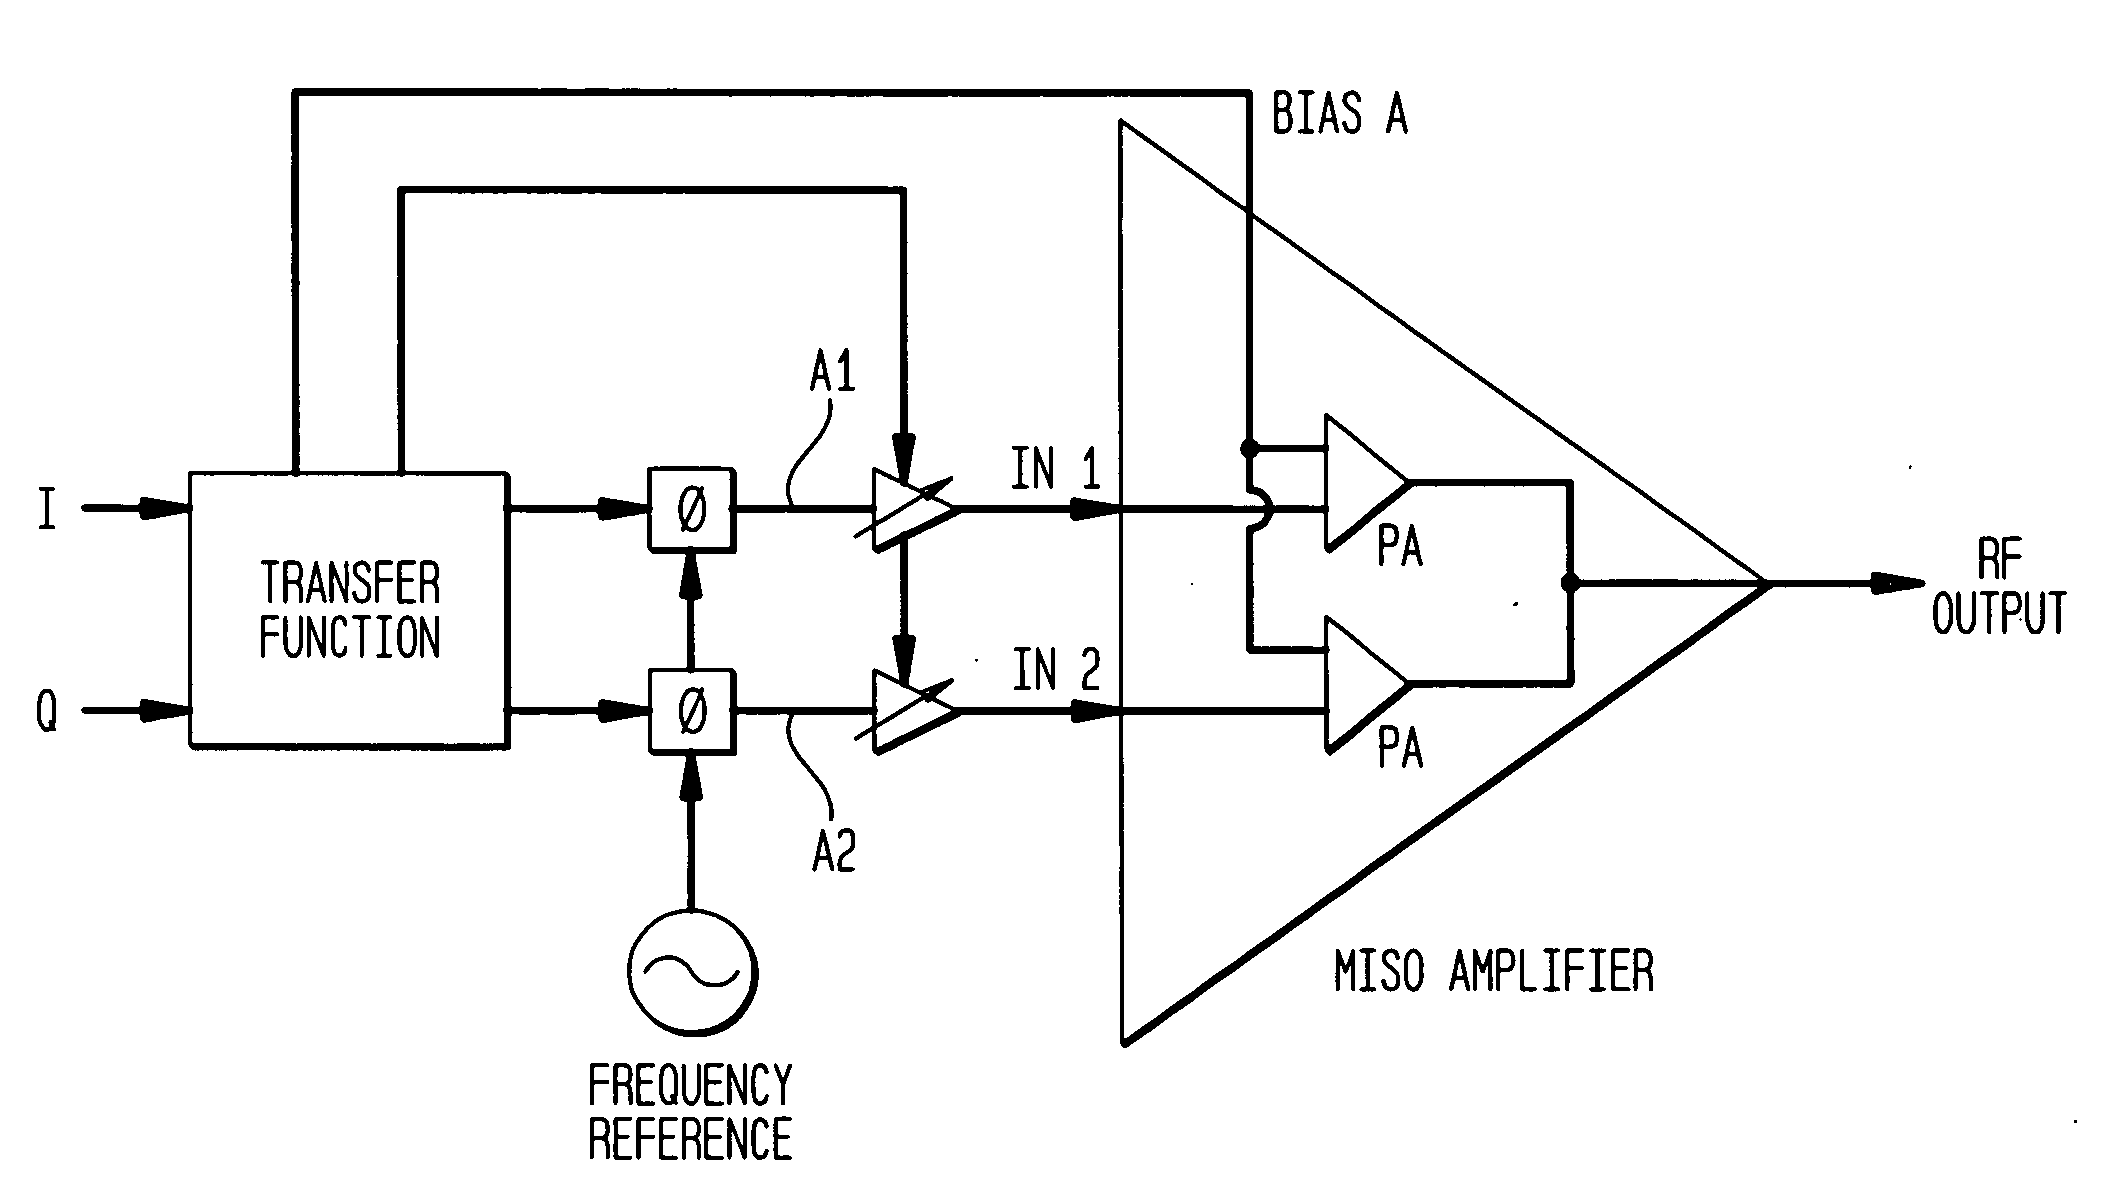 Systems and methods of RF power transmission, modulation, and amplification, including embodiments for amplifier class transitioning